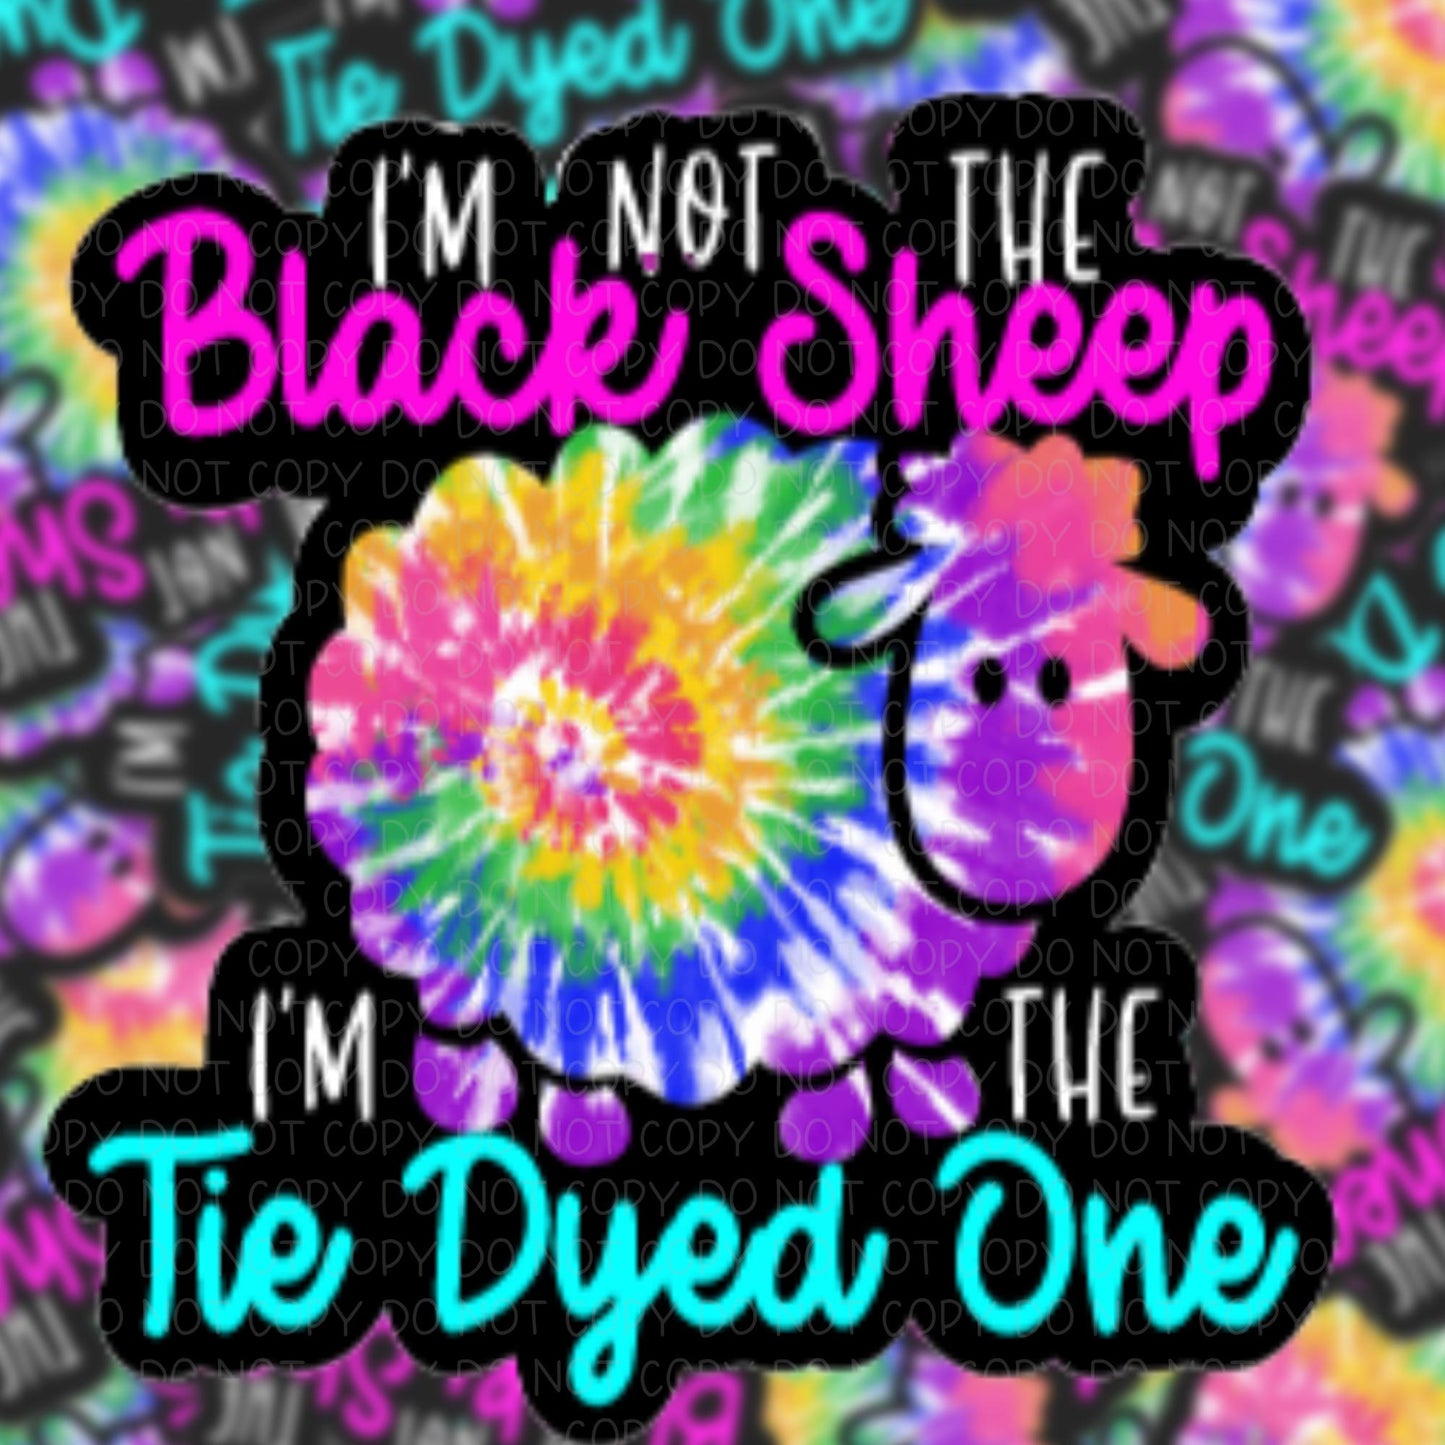 I'm Not The Black Sheep, I'm the Tie Dyed One Vinyl Sticker.